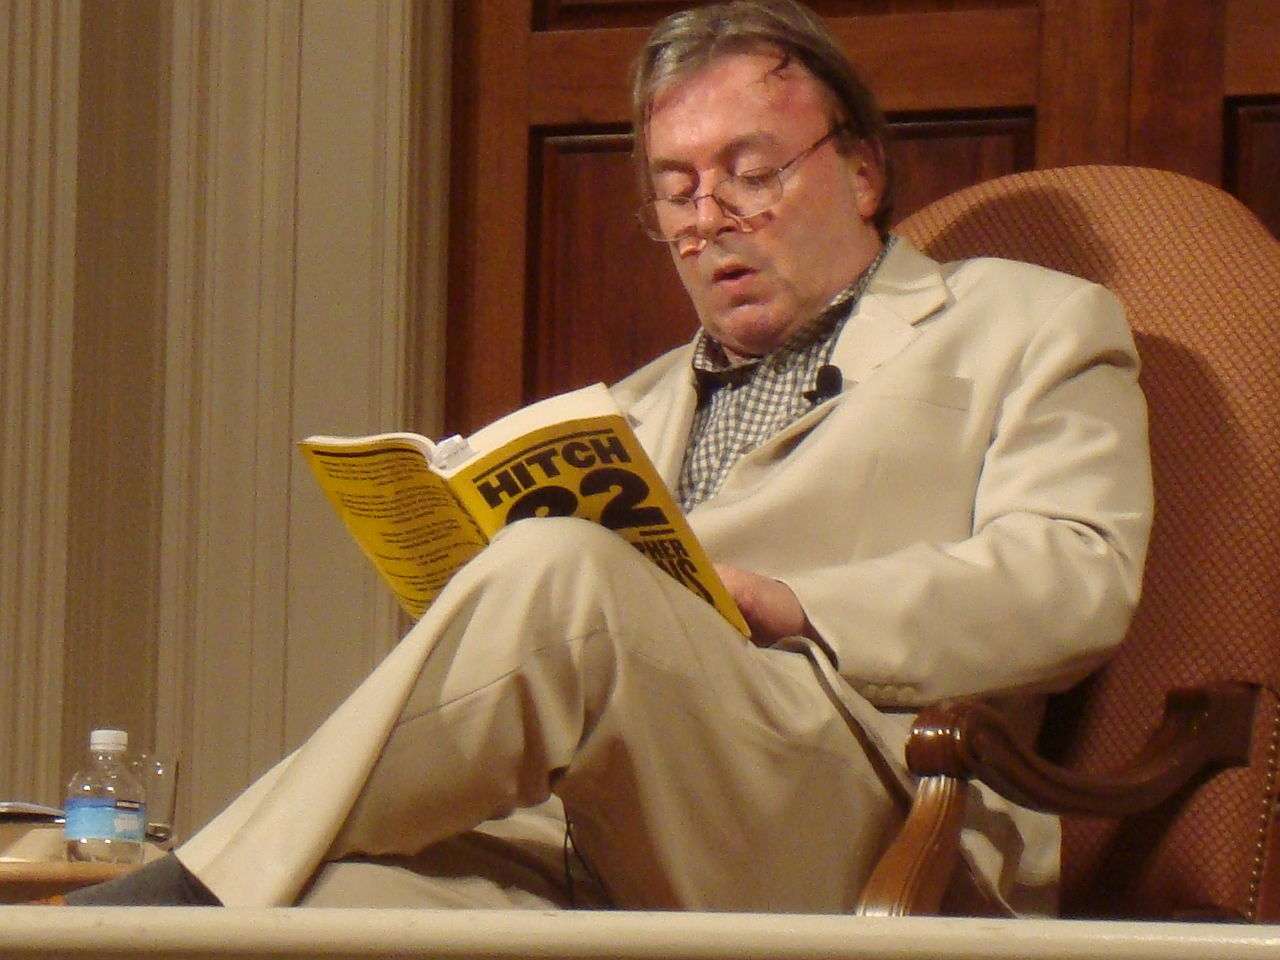 Christopher Hitchens reading his book Hitch-22 (2010)